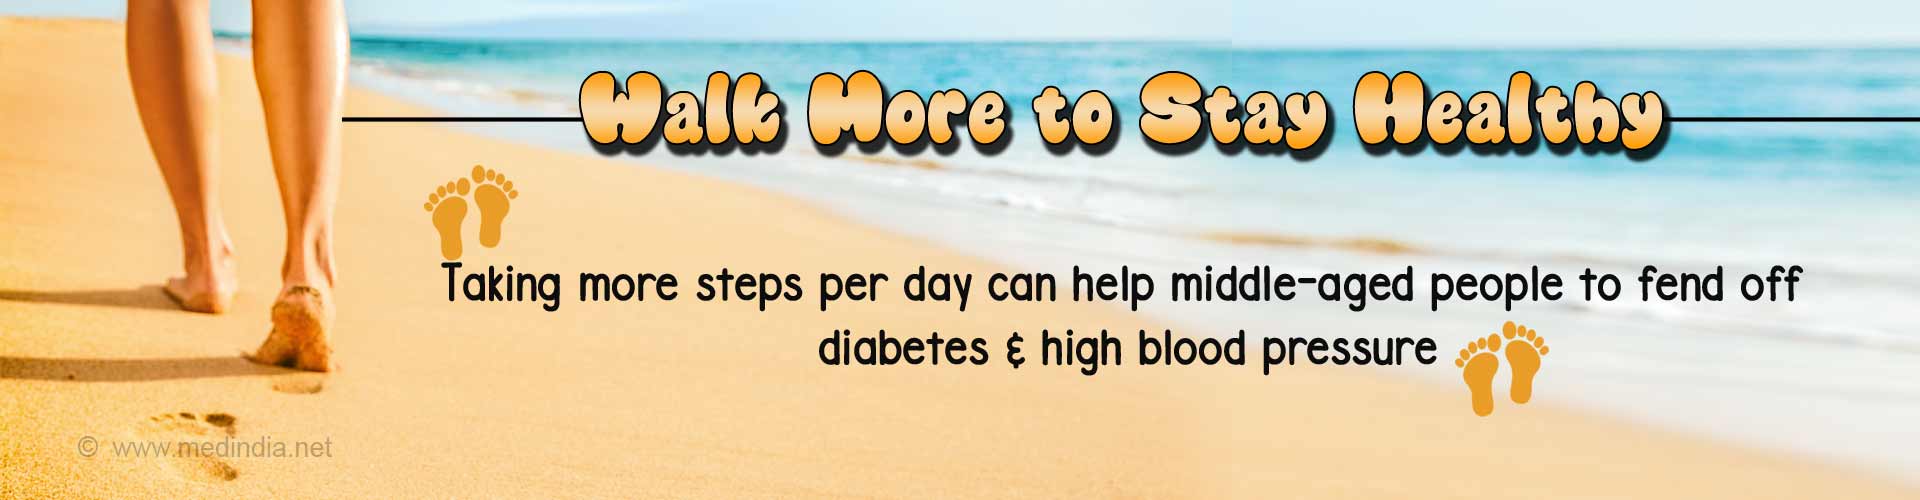 Take More Steps a Day to Fight Diabetes, High Blood Pressure